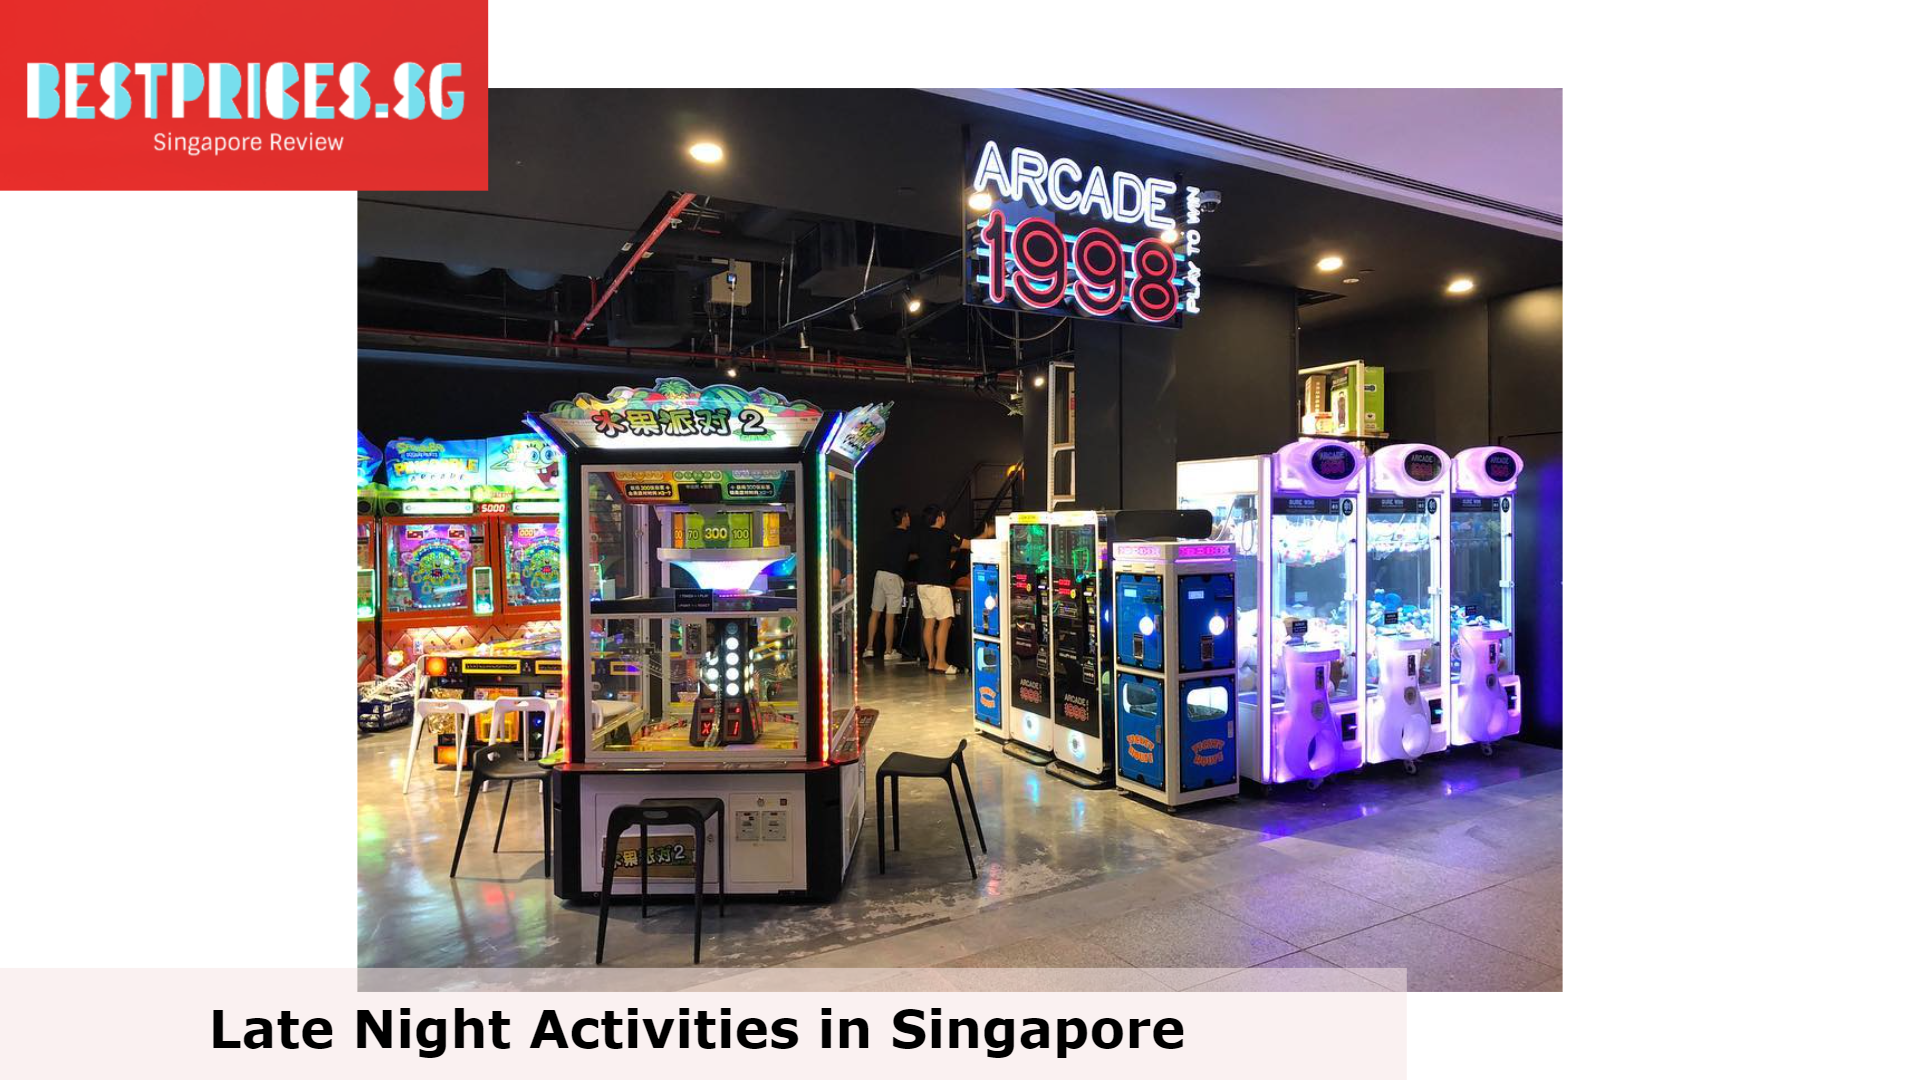 Play in the Arcades - Late Night Activities in Singapore,Late Night Activities Singapore, late night ideas singapore, Things To Do In Singapore At Night, What can you do in Singapore late at night?, What is there to do in Singapore during Covid at night?, What can you do in Singapore at 1am?, Where can I go on a late night date in Singapore?, Favorite Nighttime Activities In Singapore, what to do at night in Singapore, 24-hour activities in singapore, night activities singapore 2022, night attractions in singapore, night activities for family in singapore, places to go at night in singapore with car, where to go at night in singapore phase 3, where to go at night in singapore phase 2, 24-hour arcade singapore, 